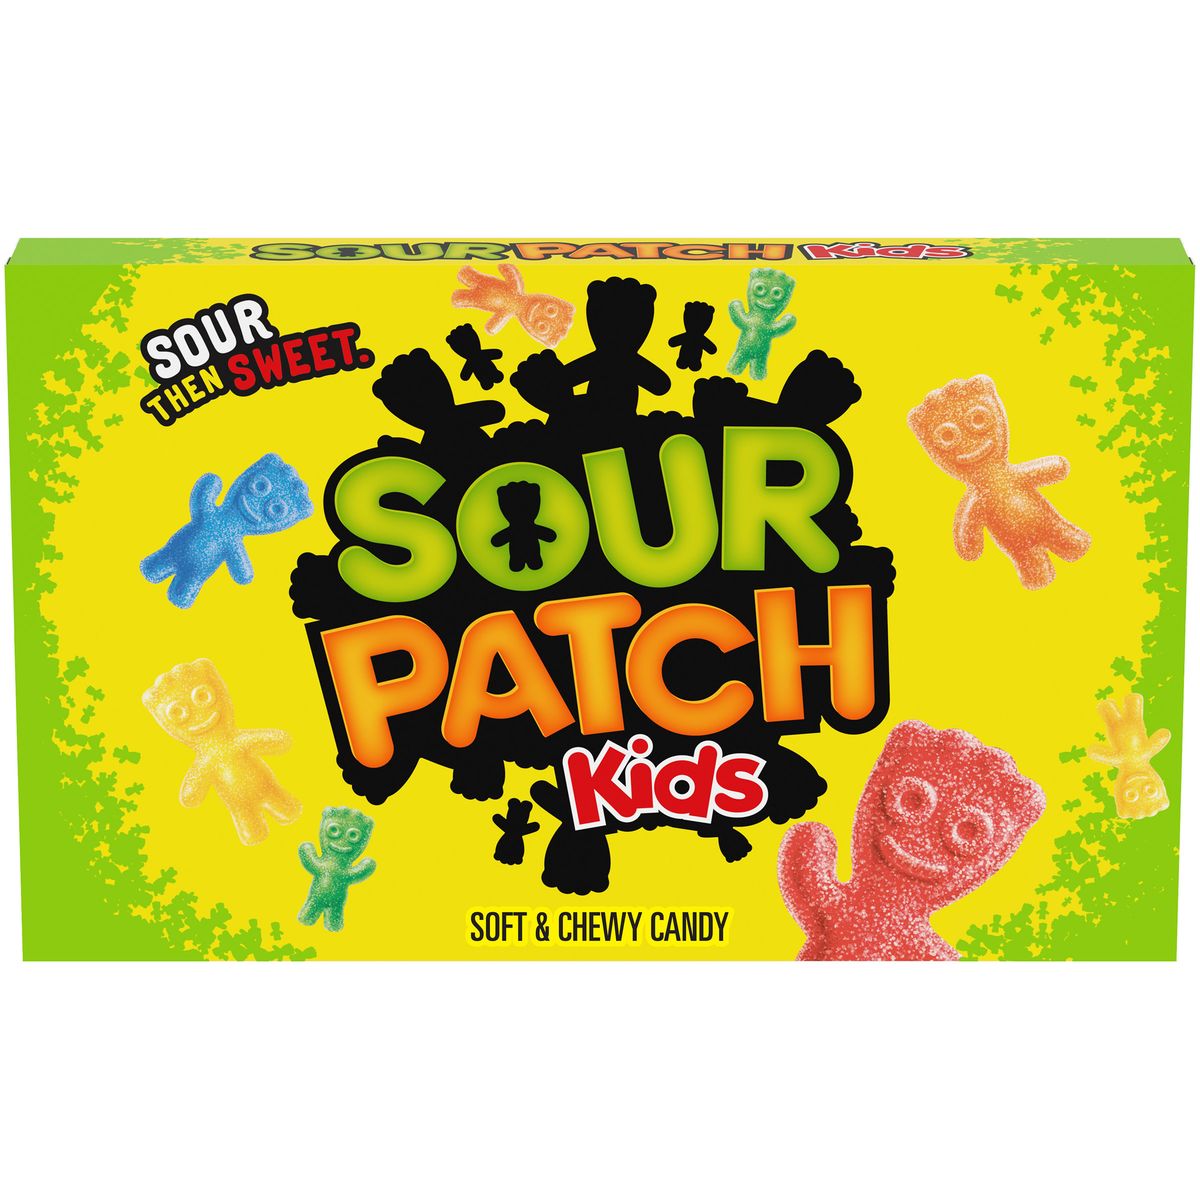 Shockers Chew Candy - Sour Cherry - Pack of 20, Shop Today. Get it  Tomorrow!